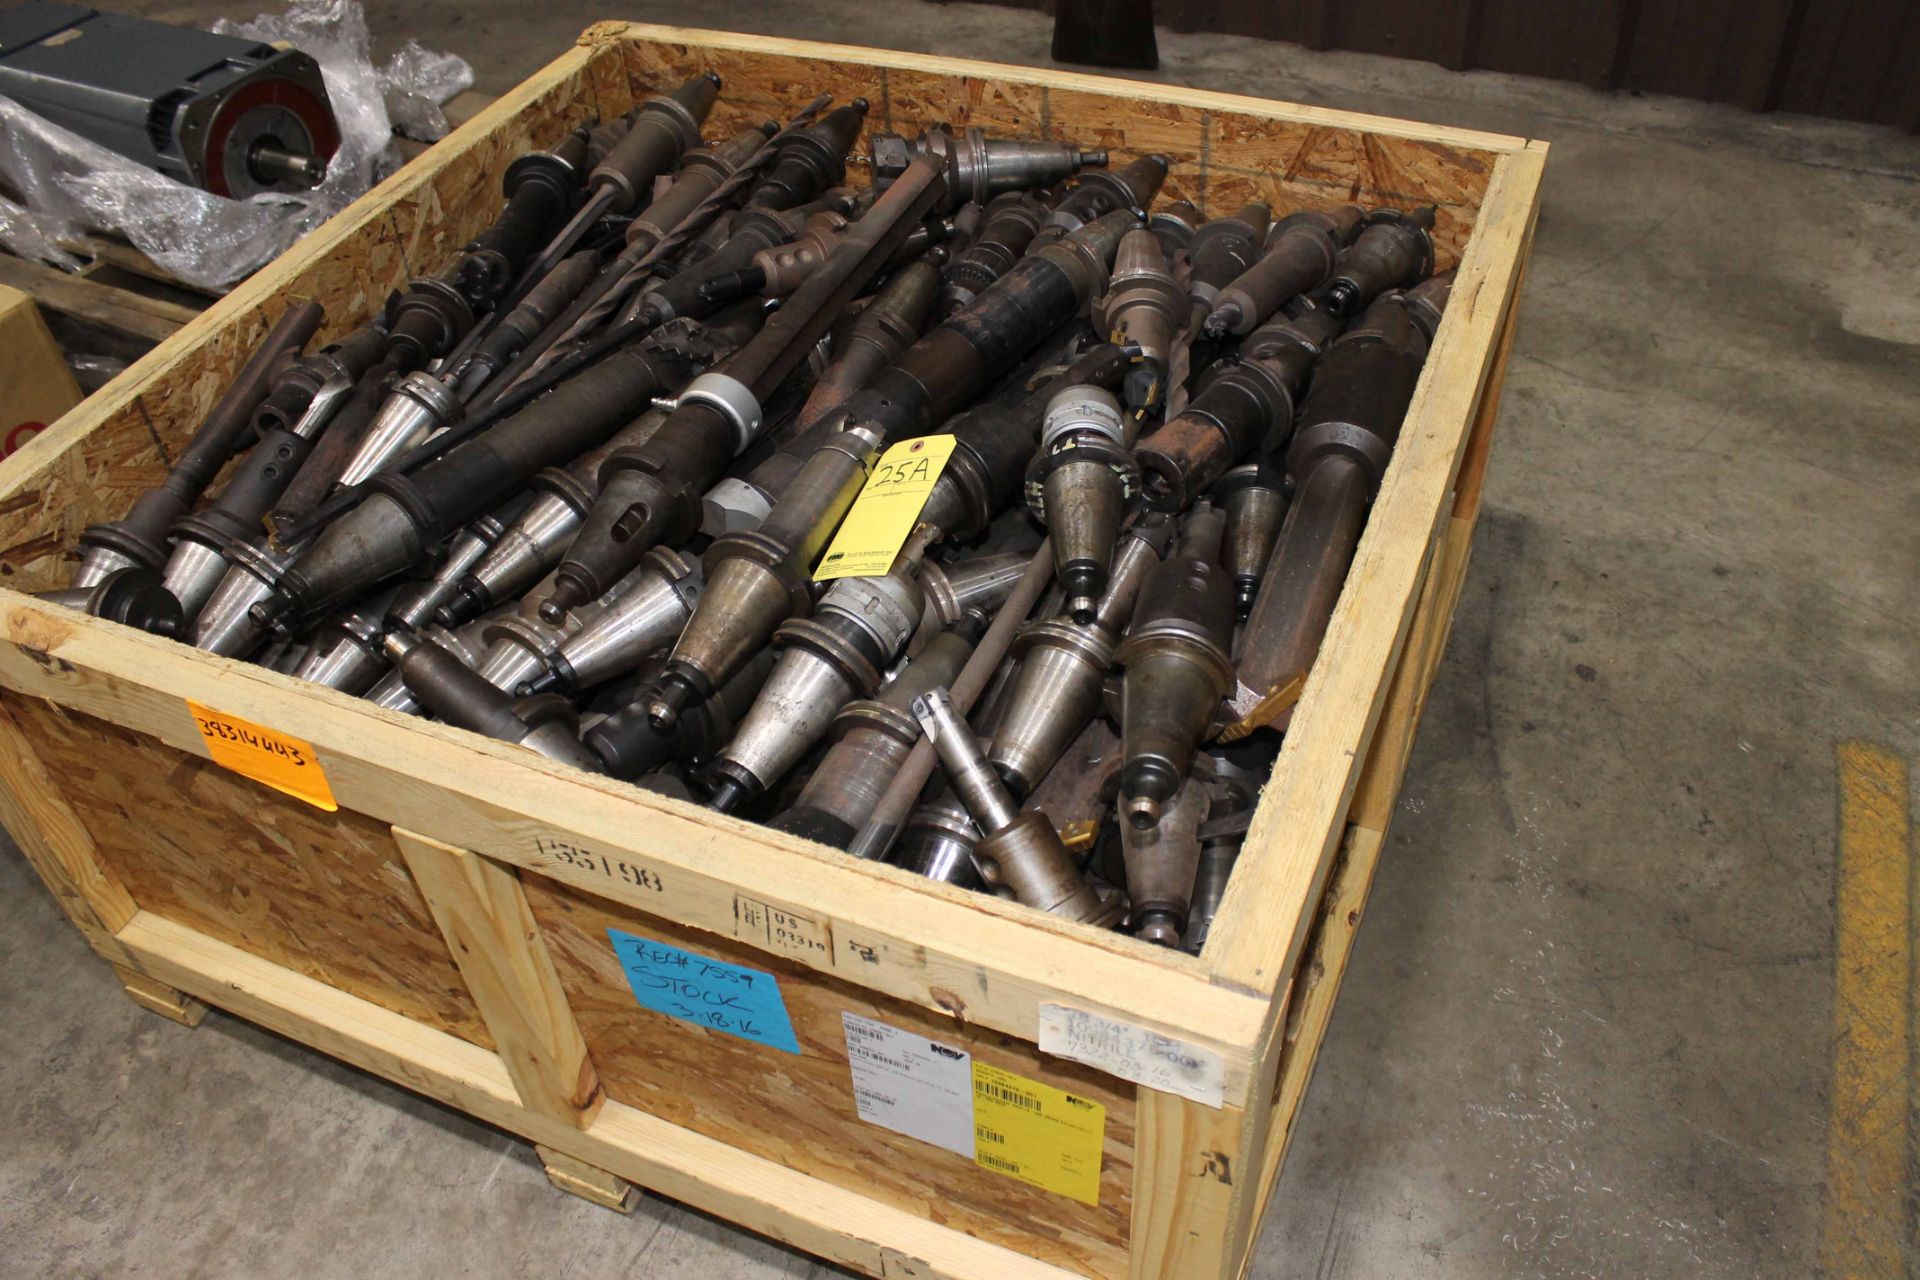 LOT CONSISTING OF: 50 taper toolholders & some boring bars (Location B - Cypress, TX)